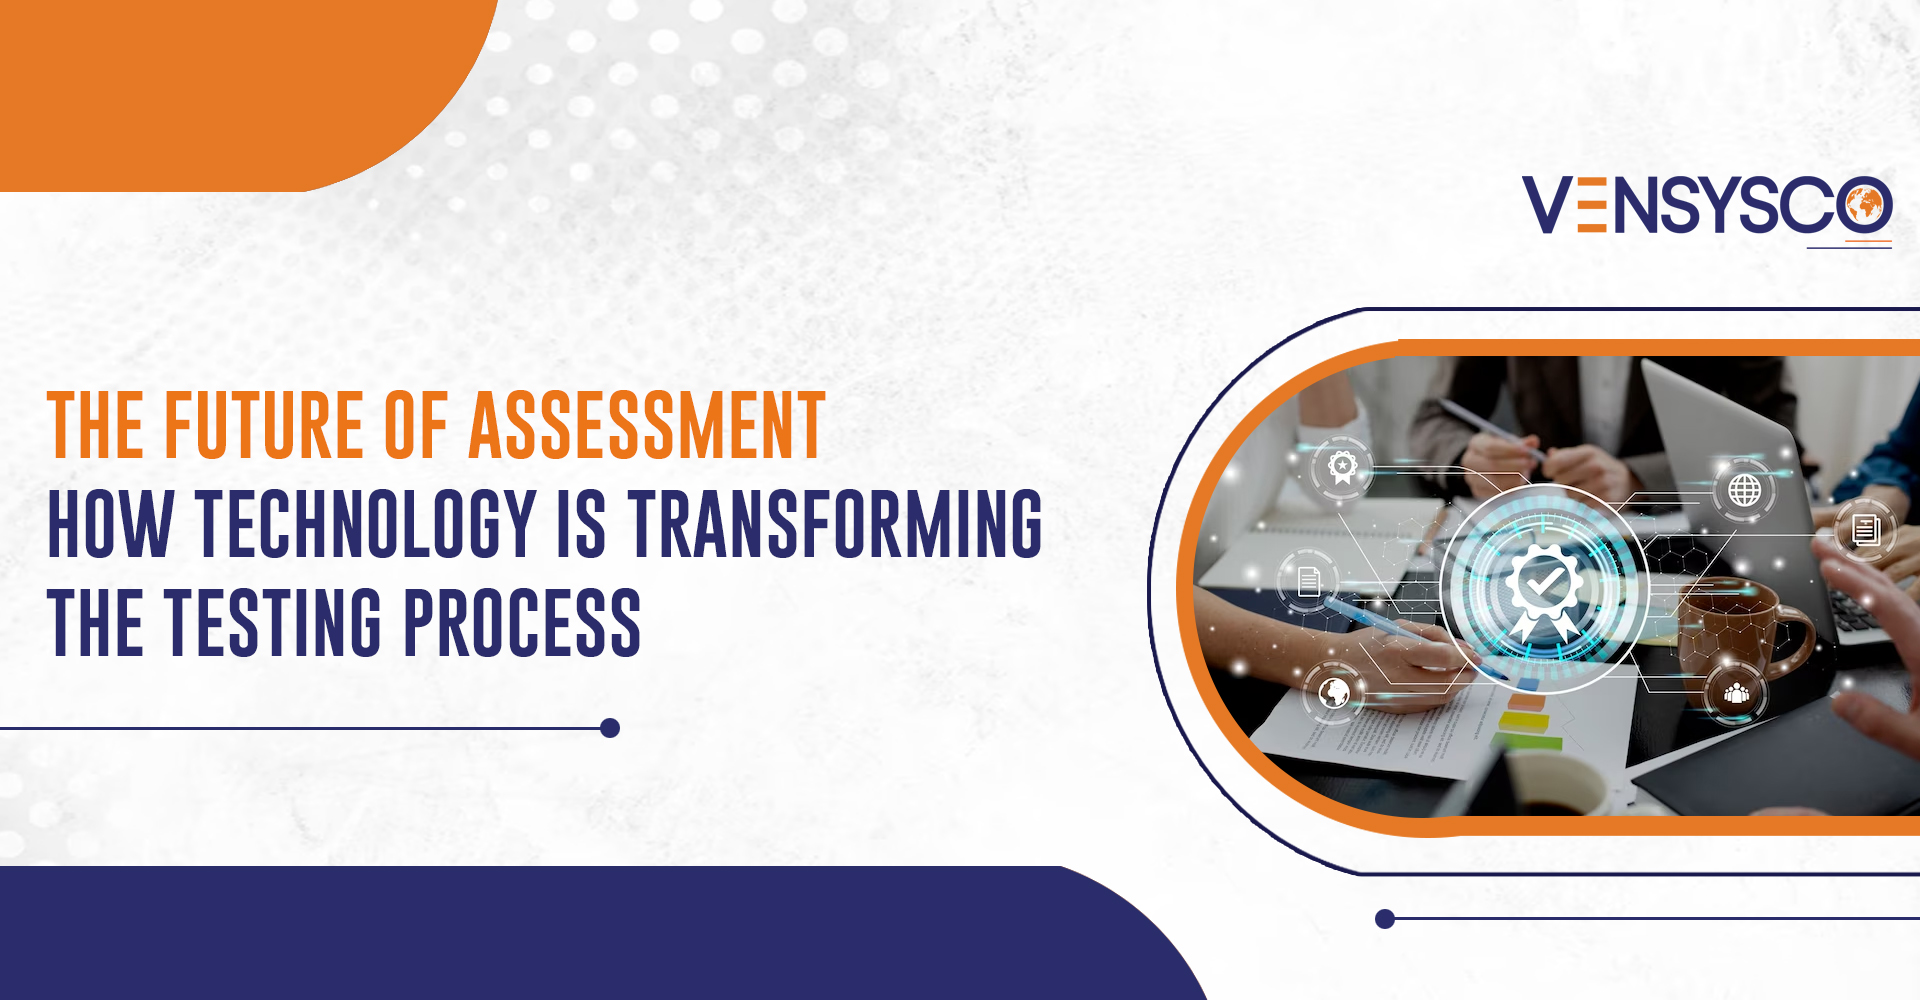 The Future of Assessment: How Technology is Transforming the Testing Process